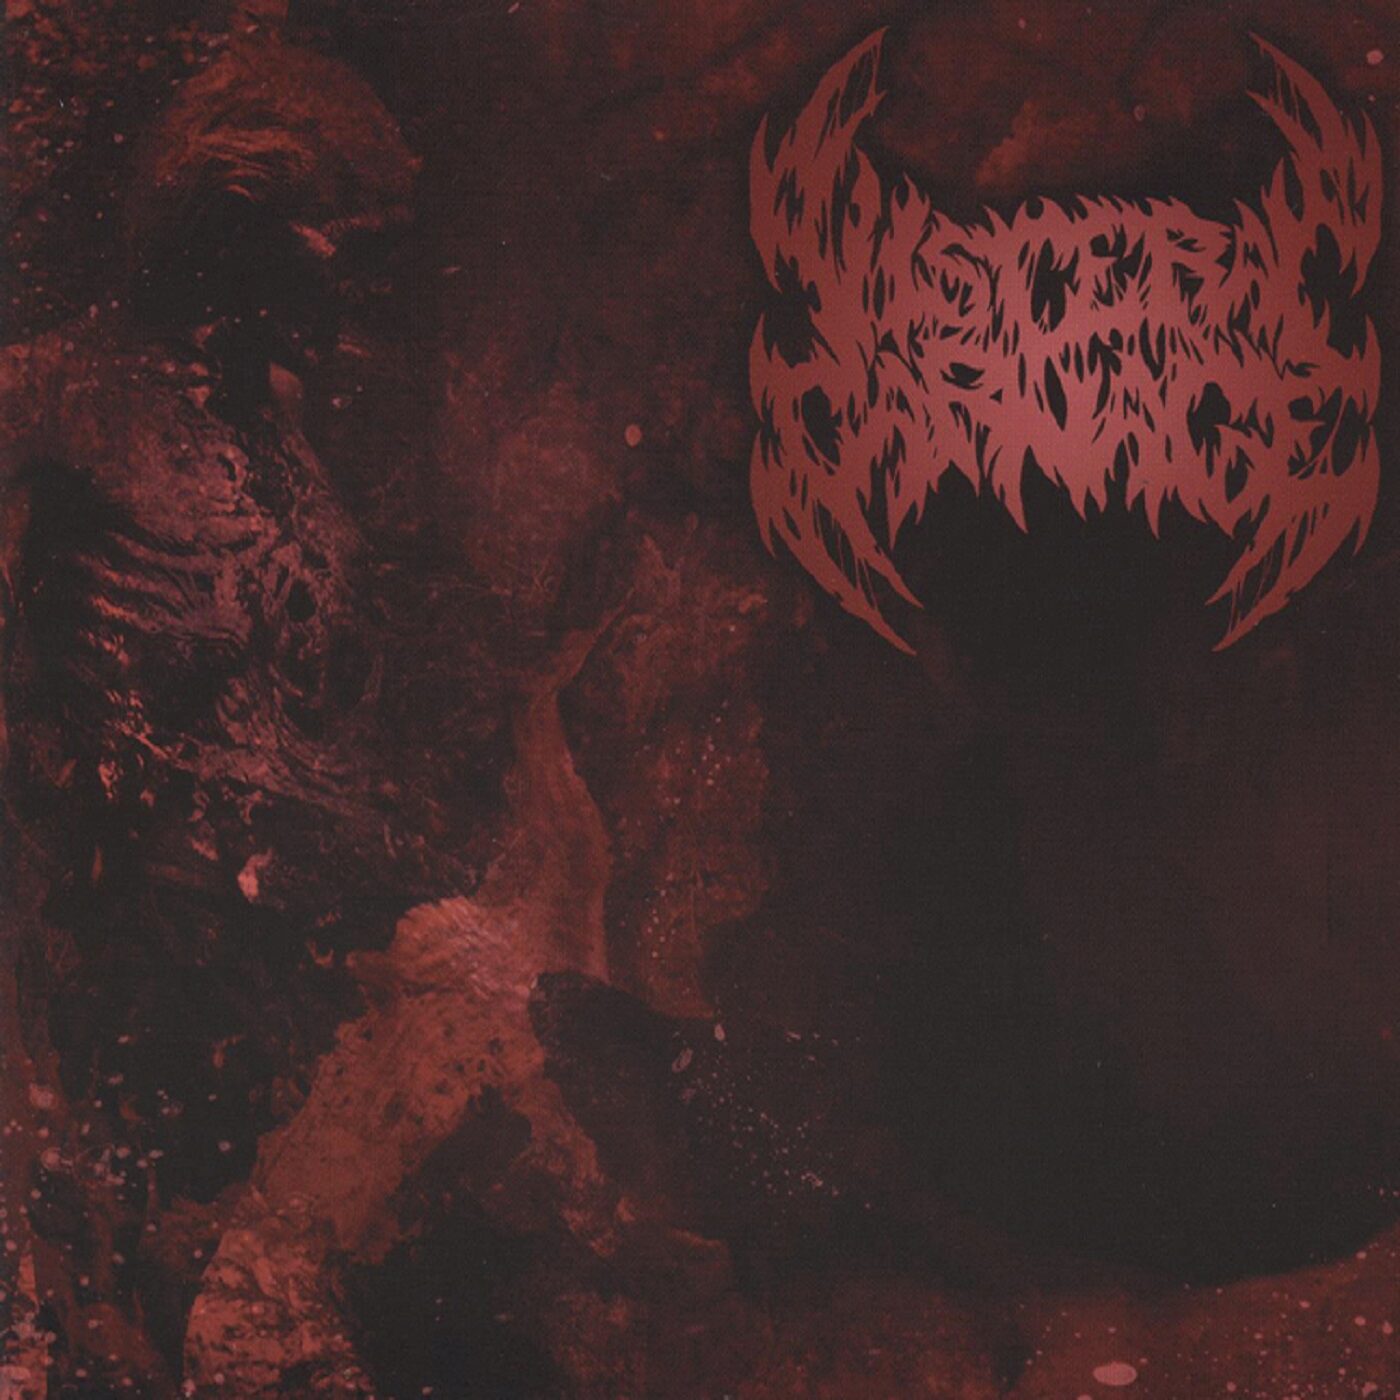 Visceral dissection orgy in autopsy full album